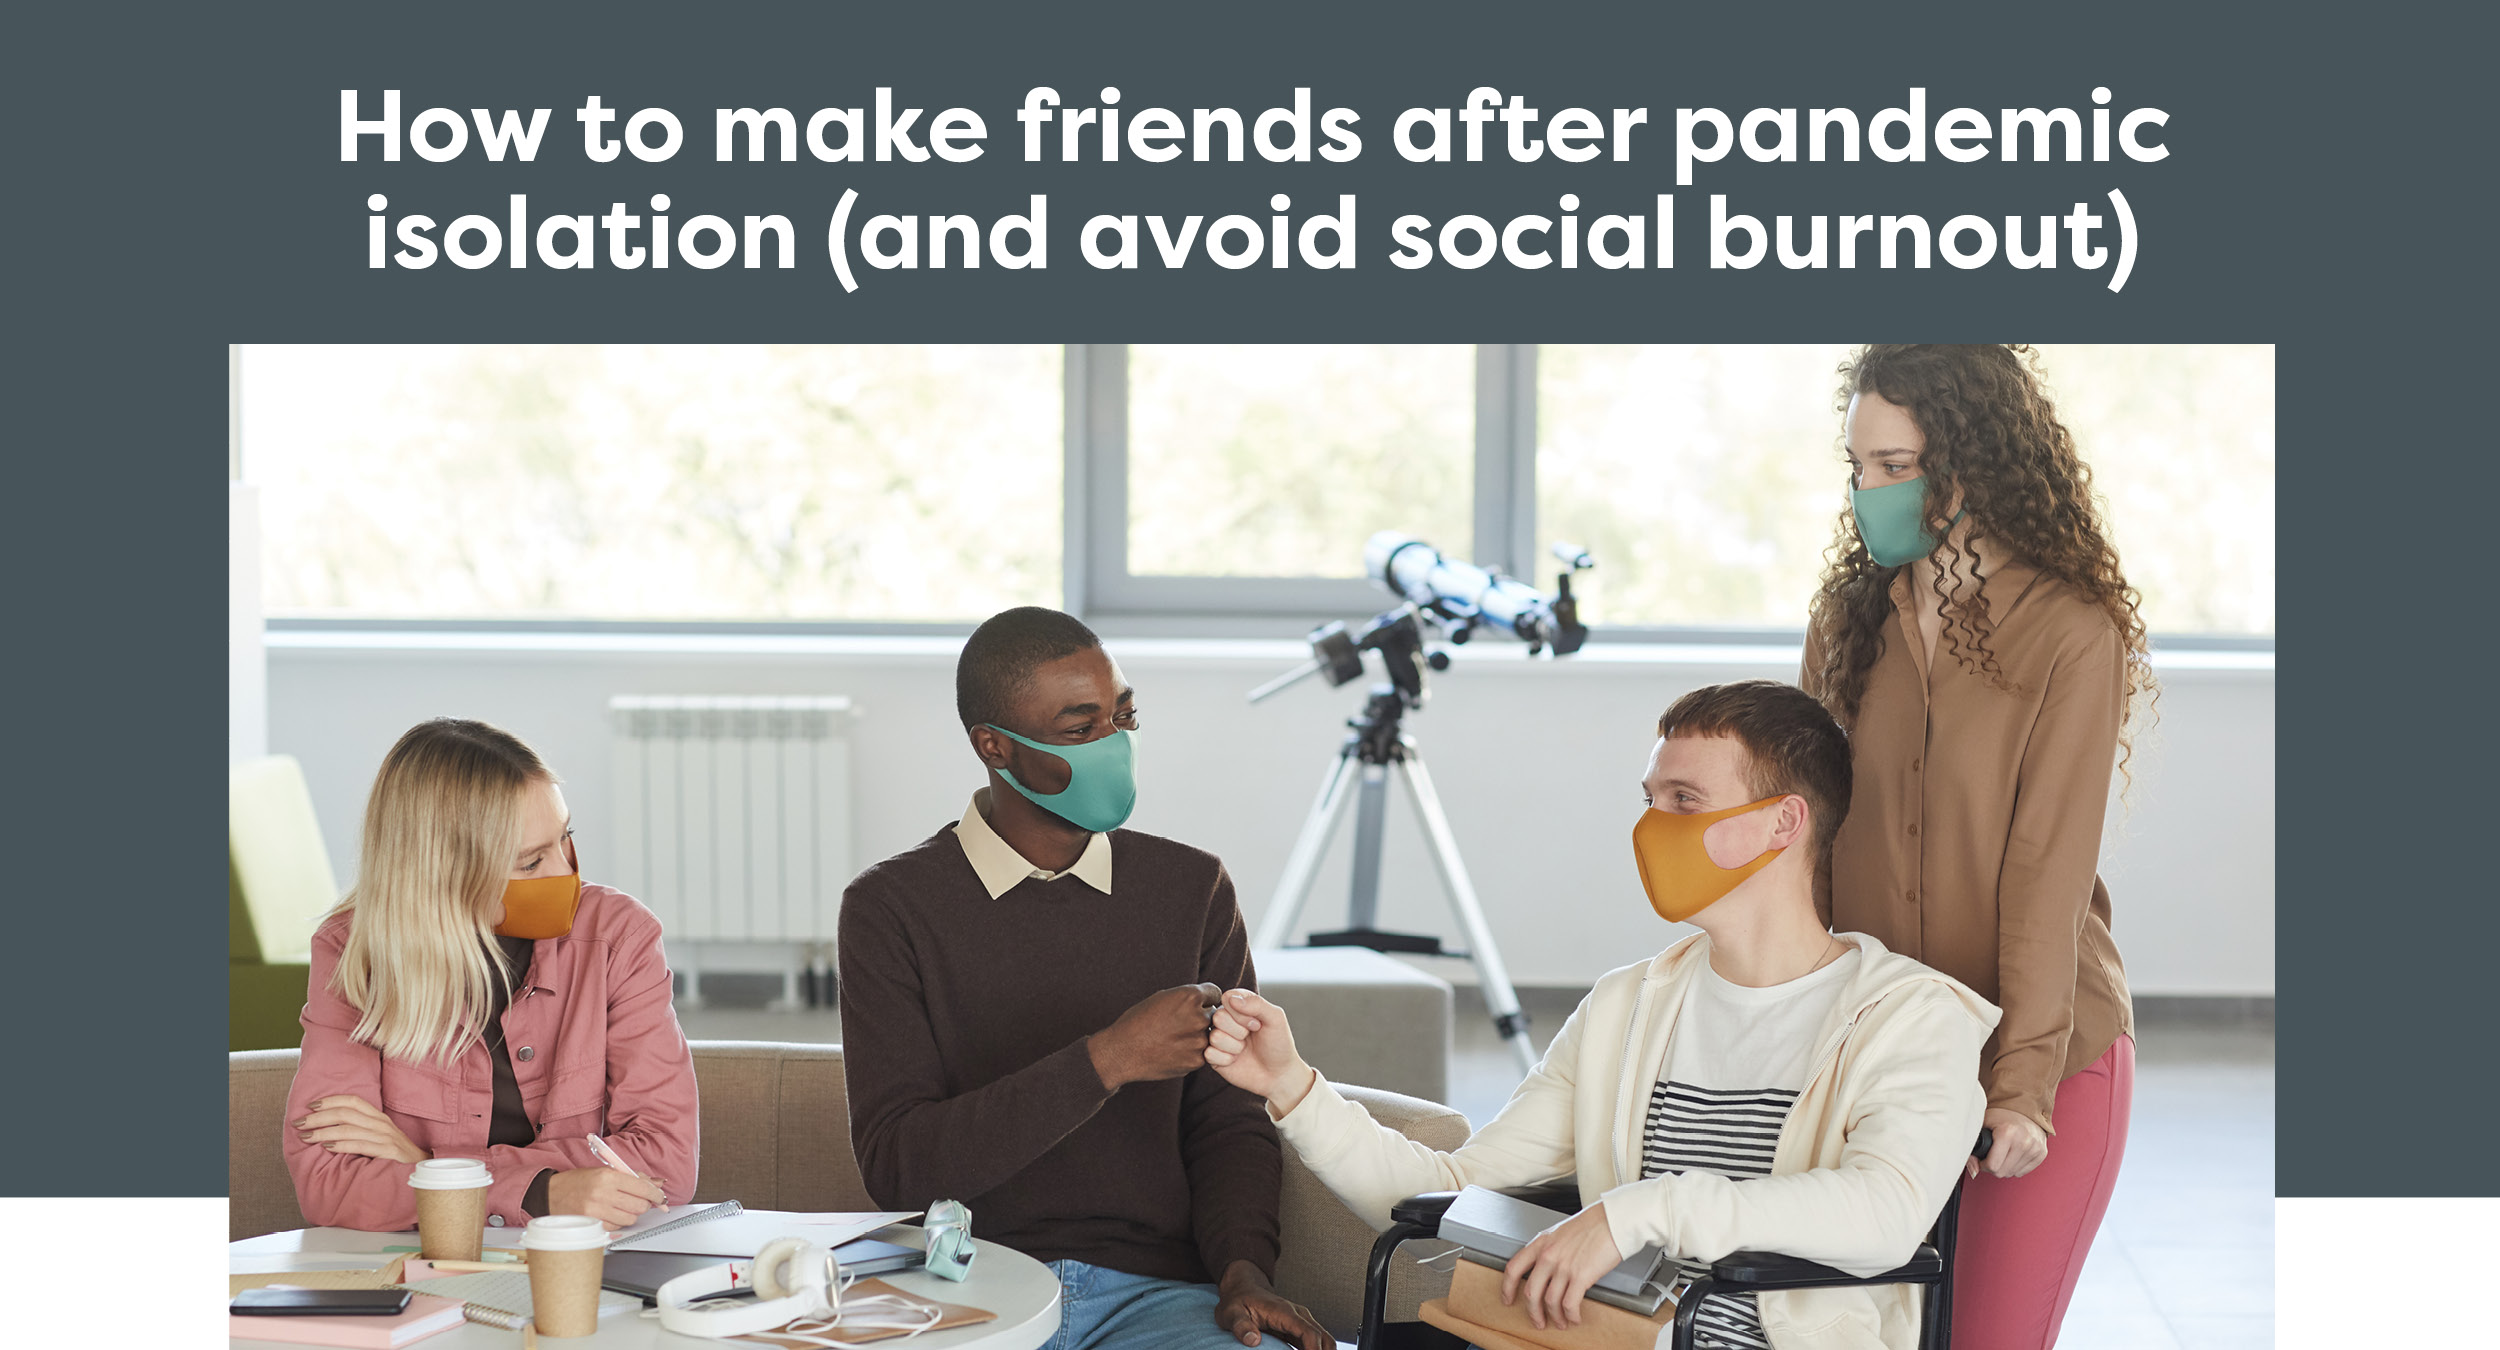 How to make friends after pandemic isolation (and avoid social burnout)></a></td>
  </tr>
</table>

	
	<table align=